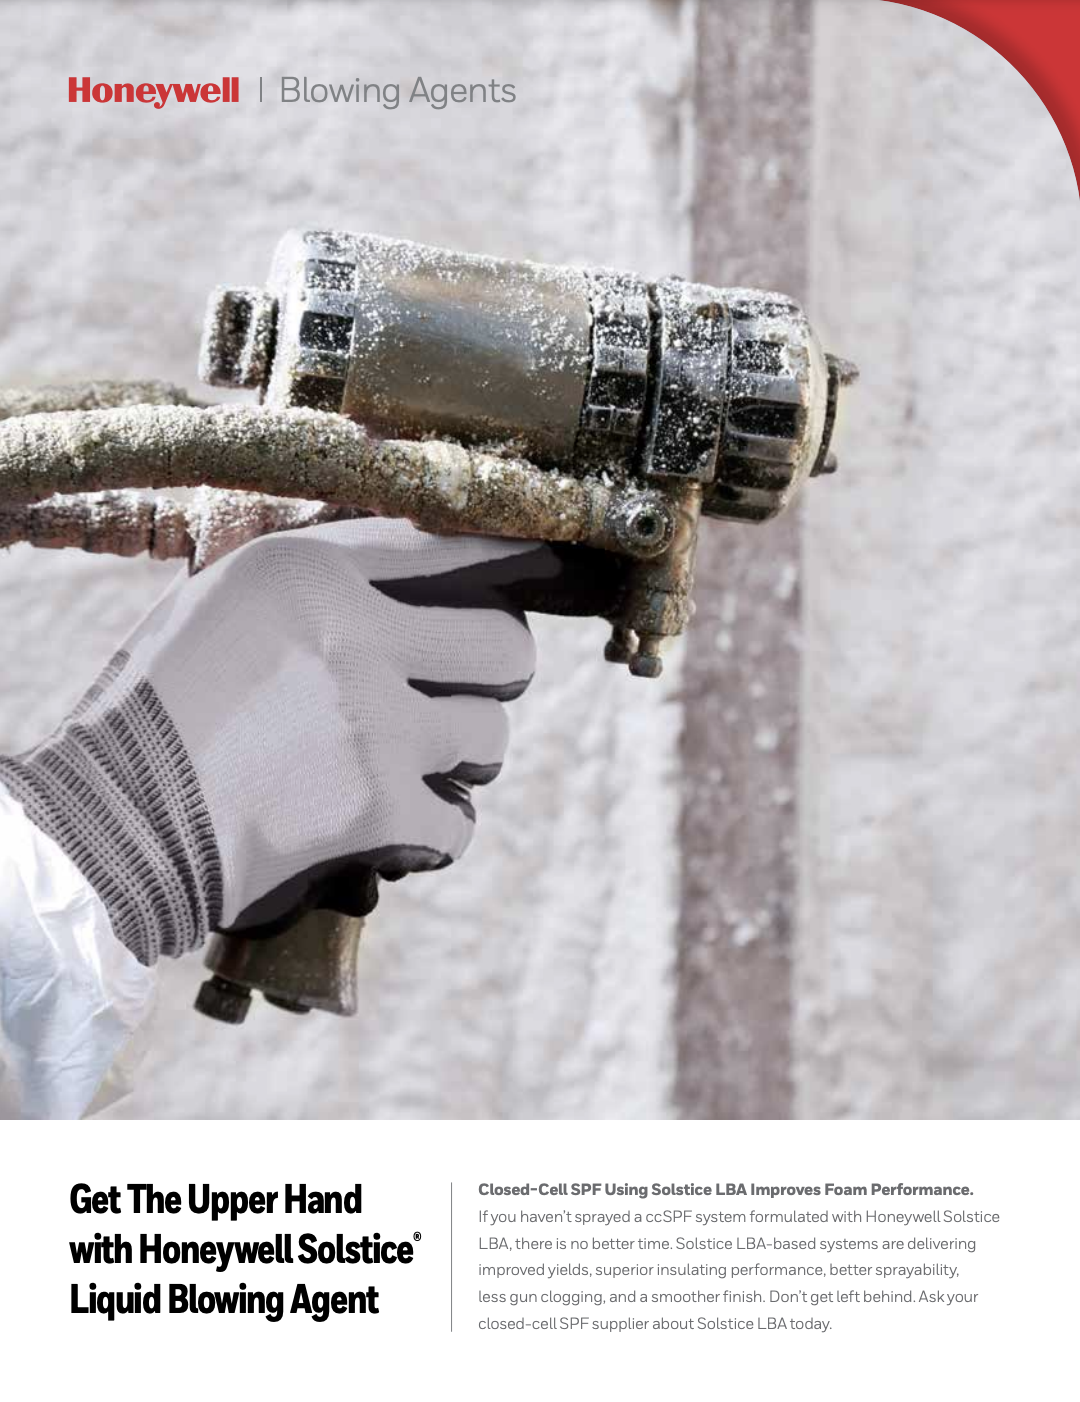 Get The Upper Hand with Honeywell Solstice® Liquid Blowing Agent